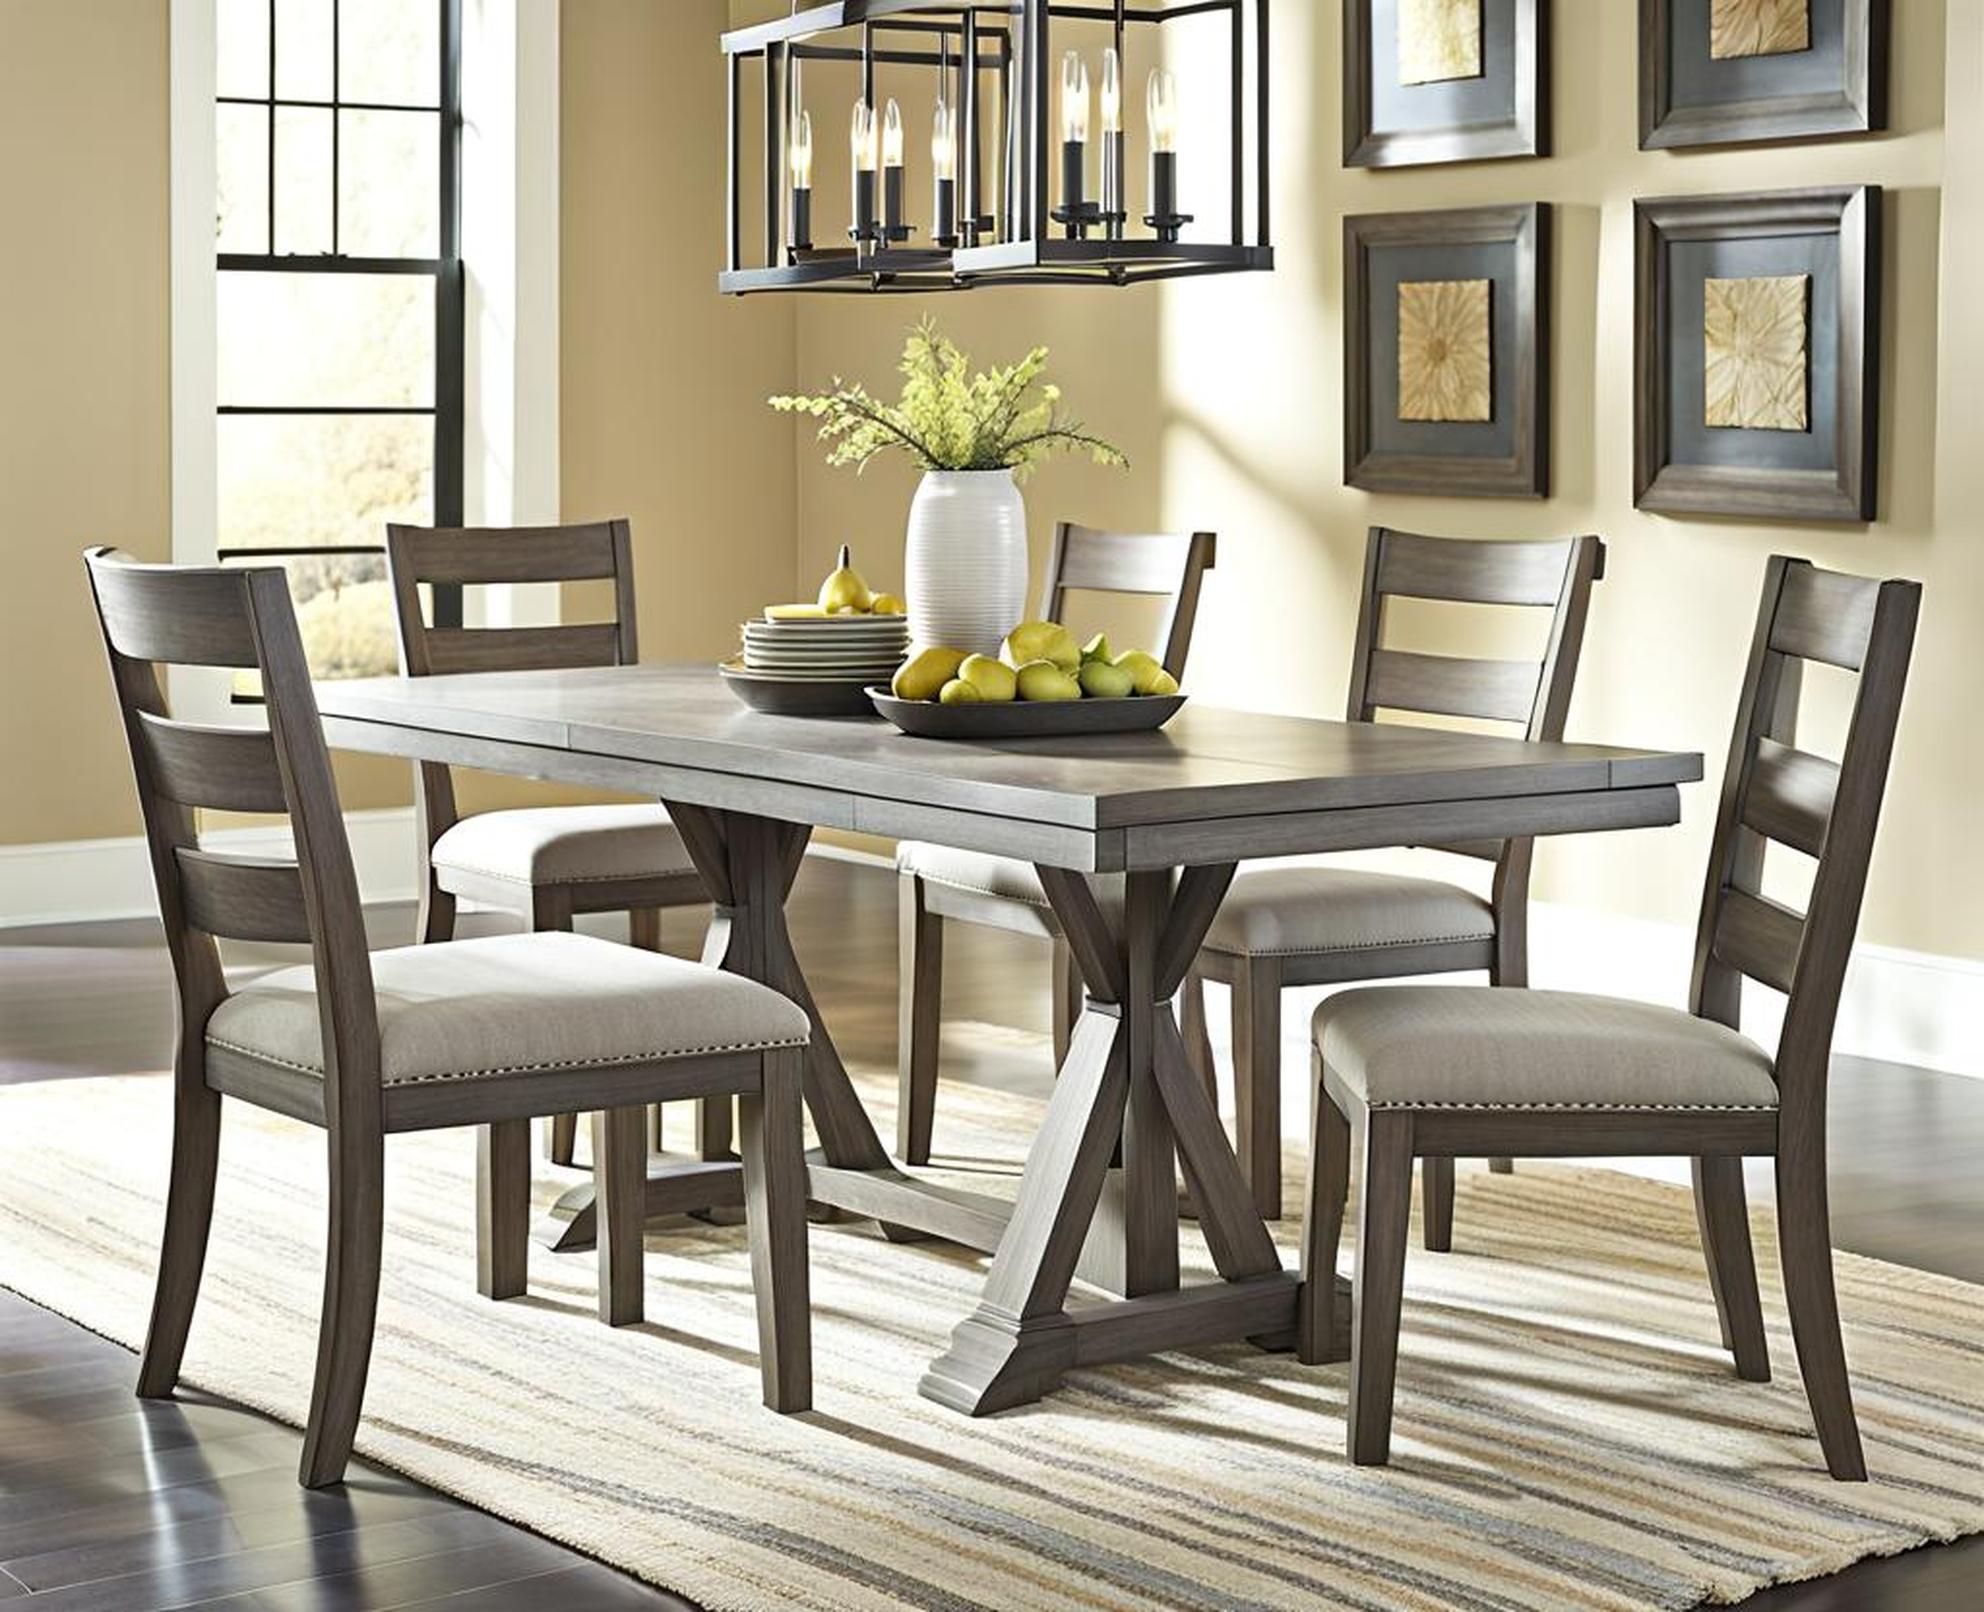 besteneer dining table and 4 chairs